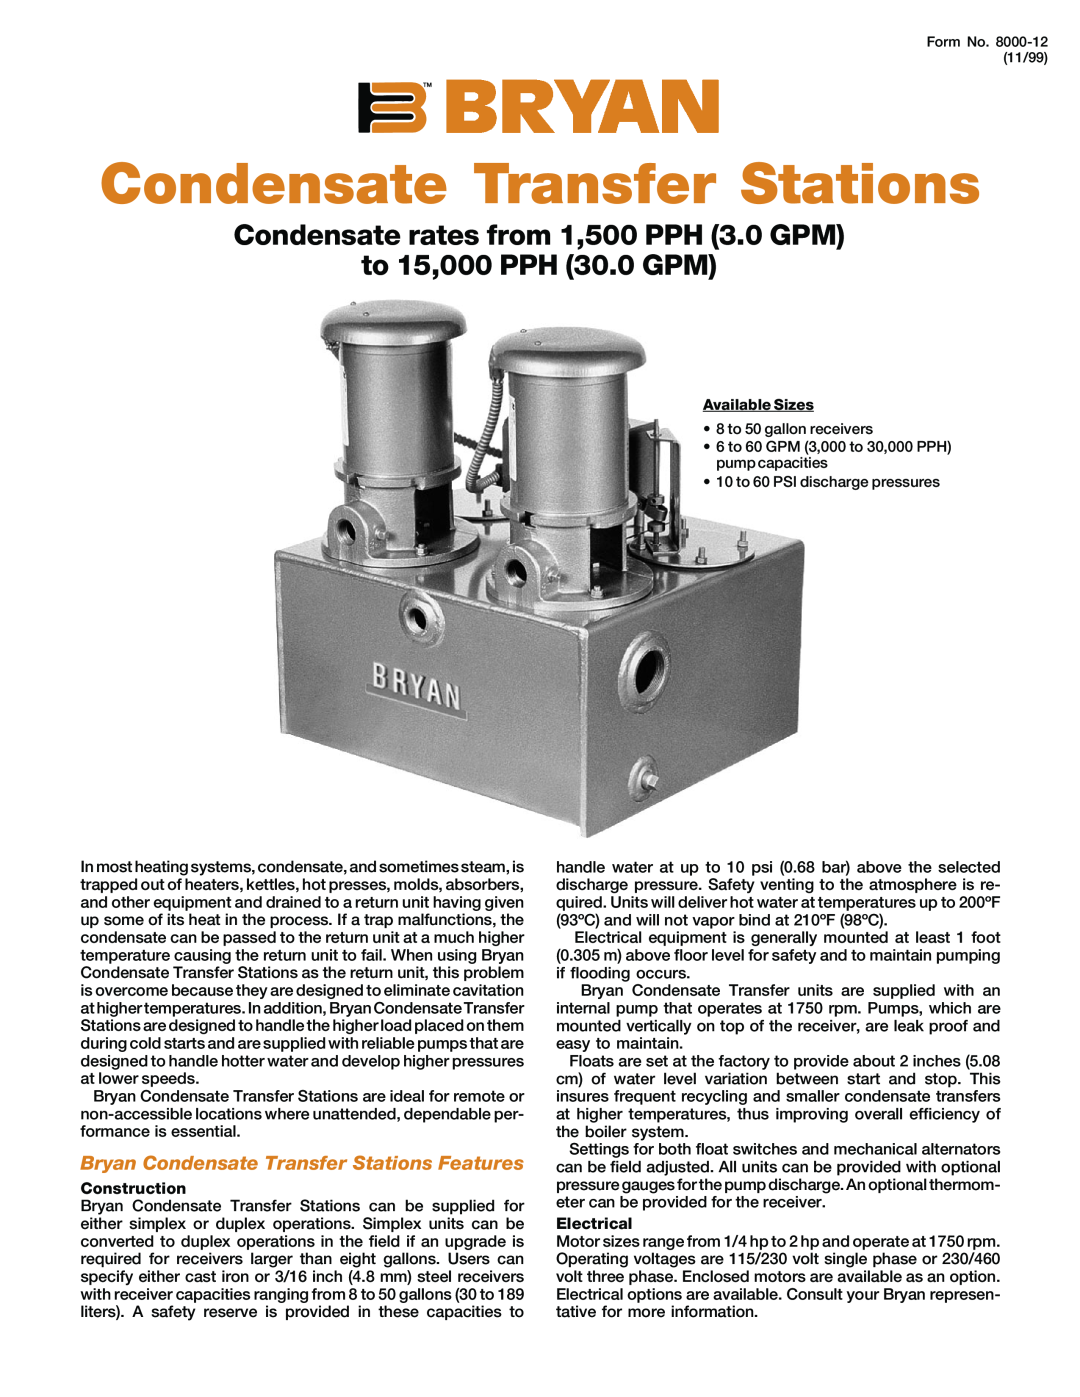 Bryan Boilers Broile System manual Bryan Condensate Transfer Stations Features 